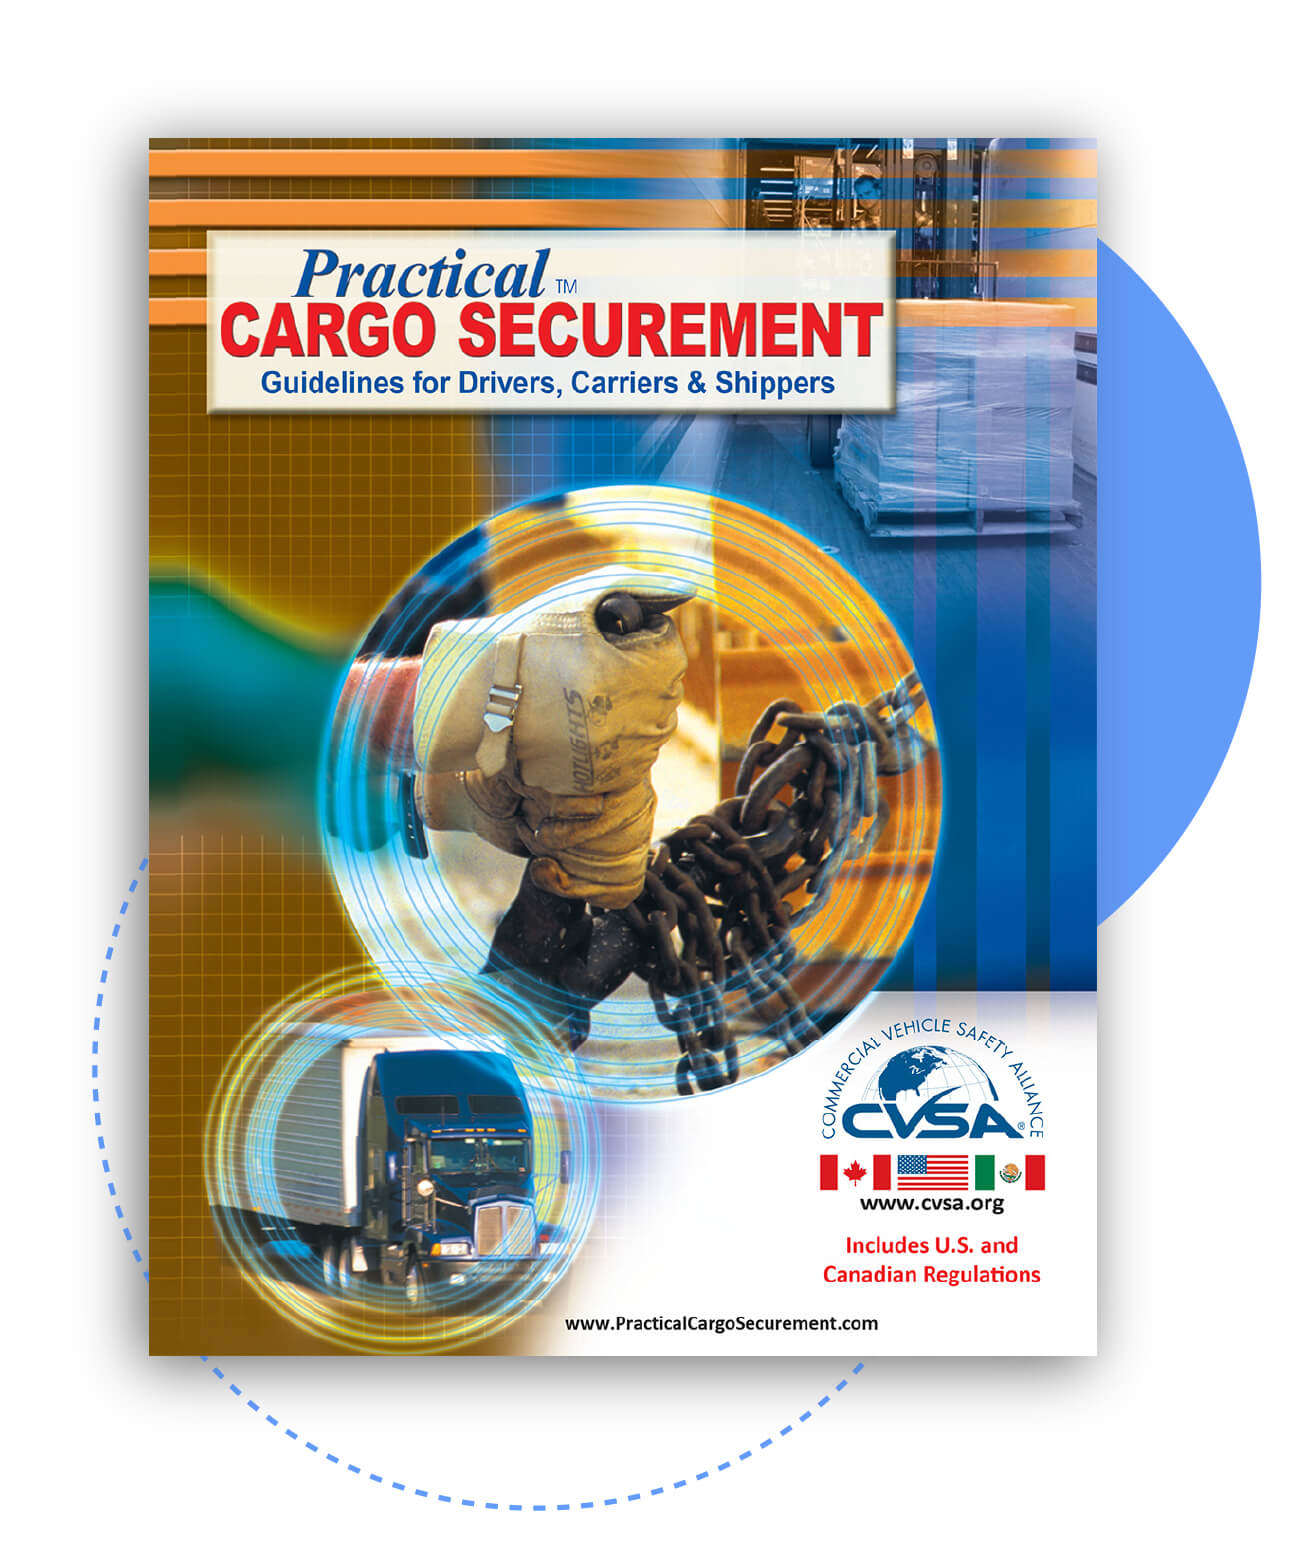 Practical cargo securement booklet cover